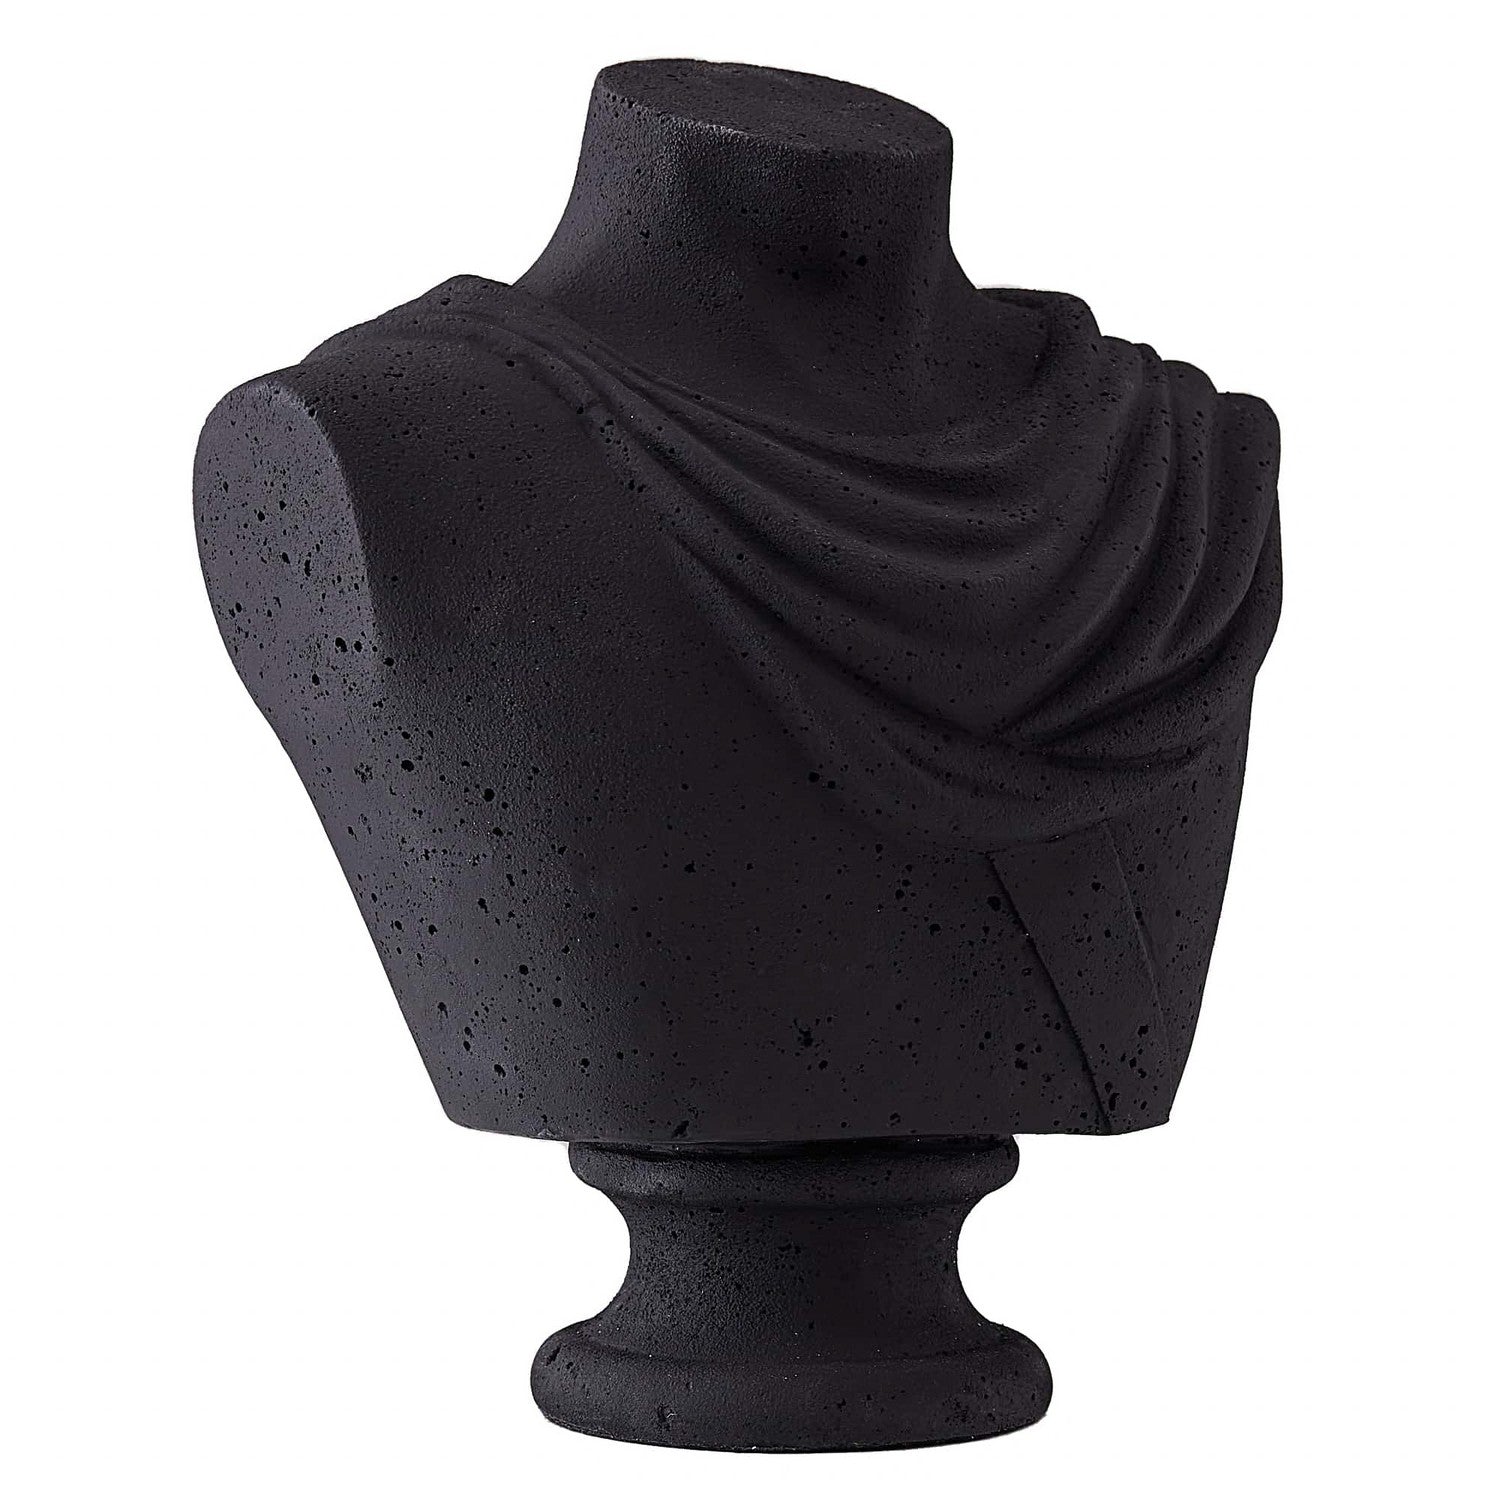 Sculpture from the Valhalla collection in Charcoal finish